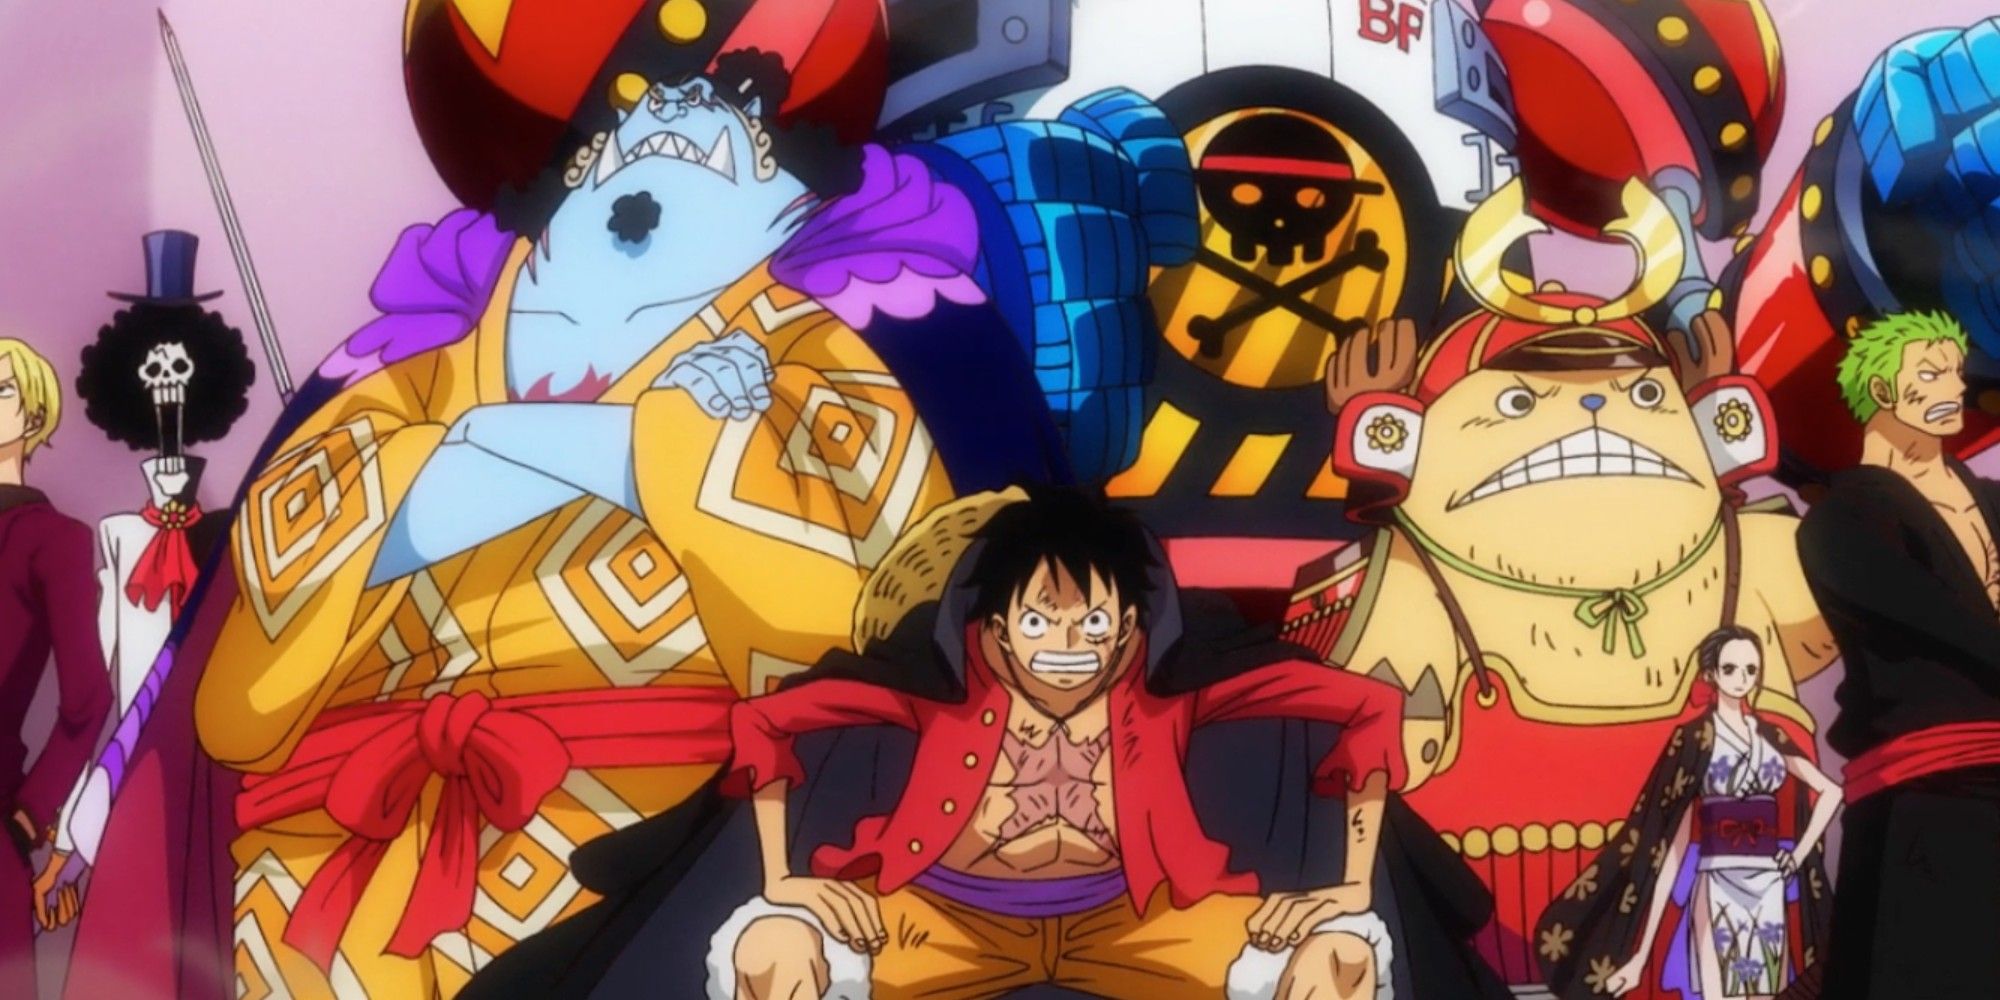 All of Luffy's crew : Straw Hat Pirates 10th Member